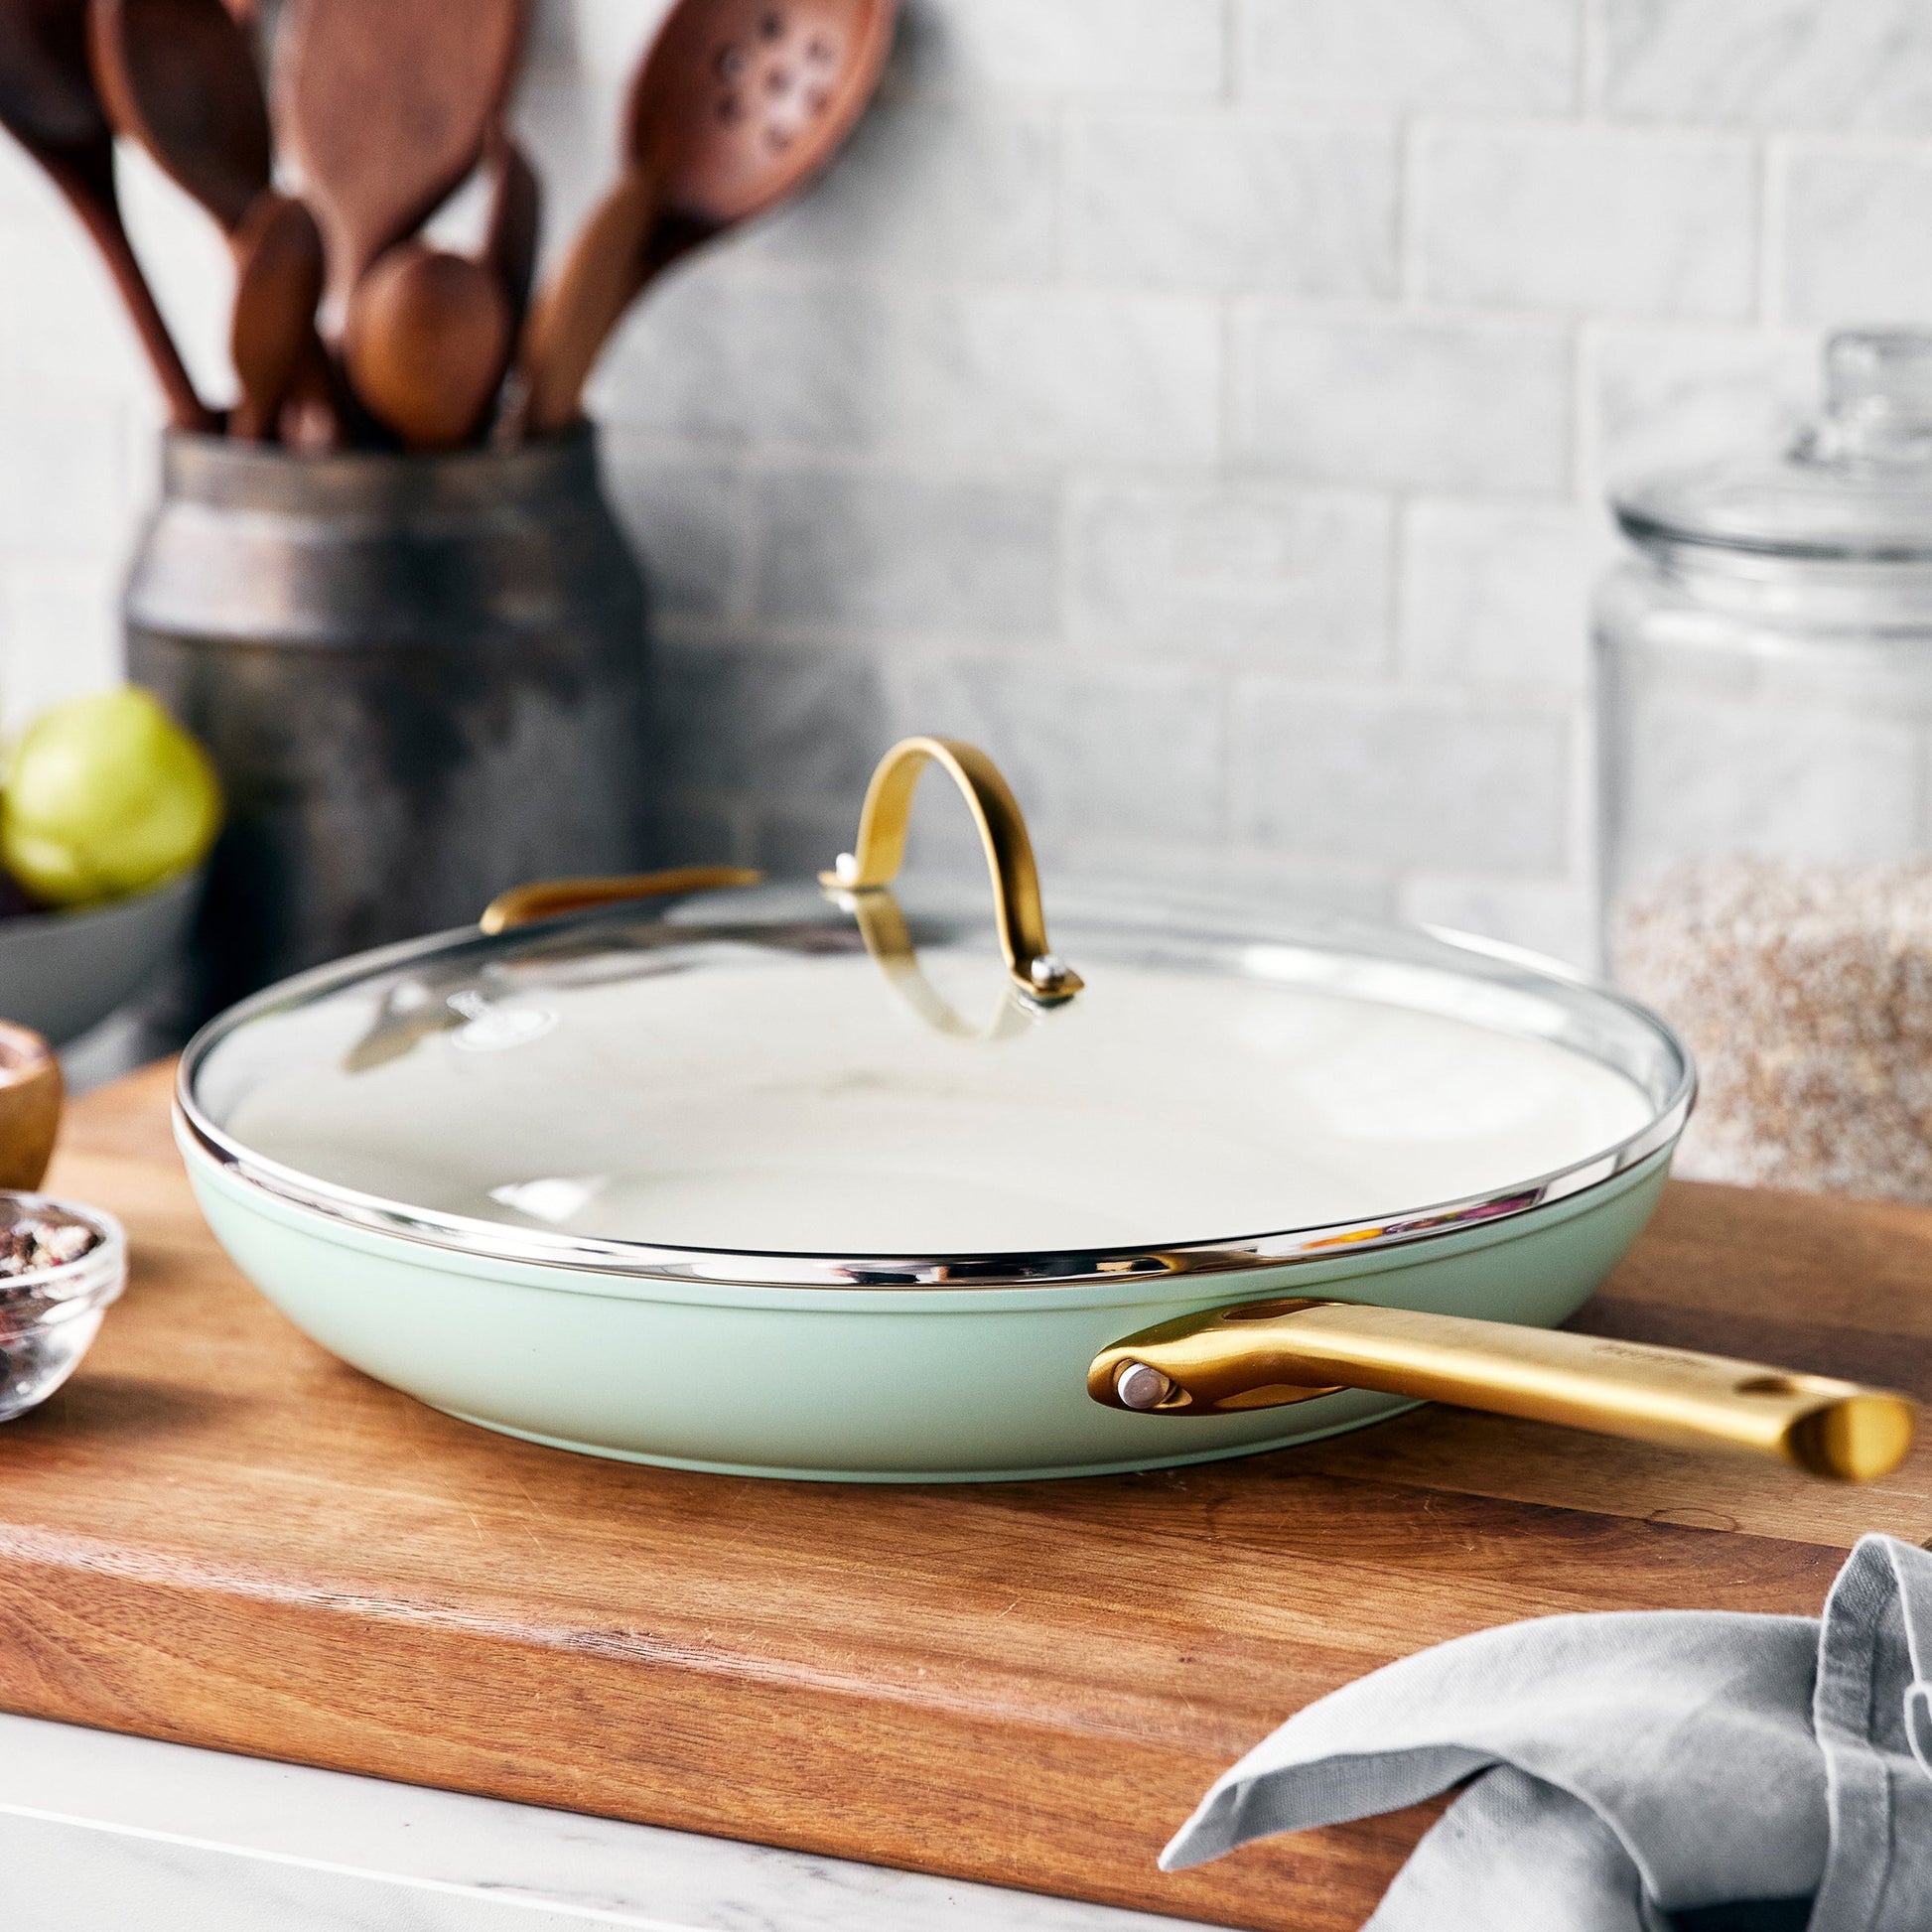 GreenPan Reserve Nonstick Skillet with Glass Lid, 12-Inch on Food52